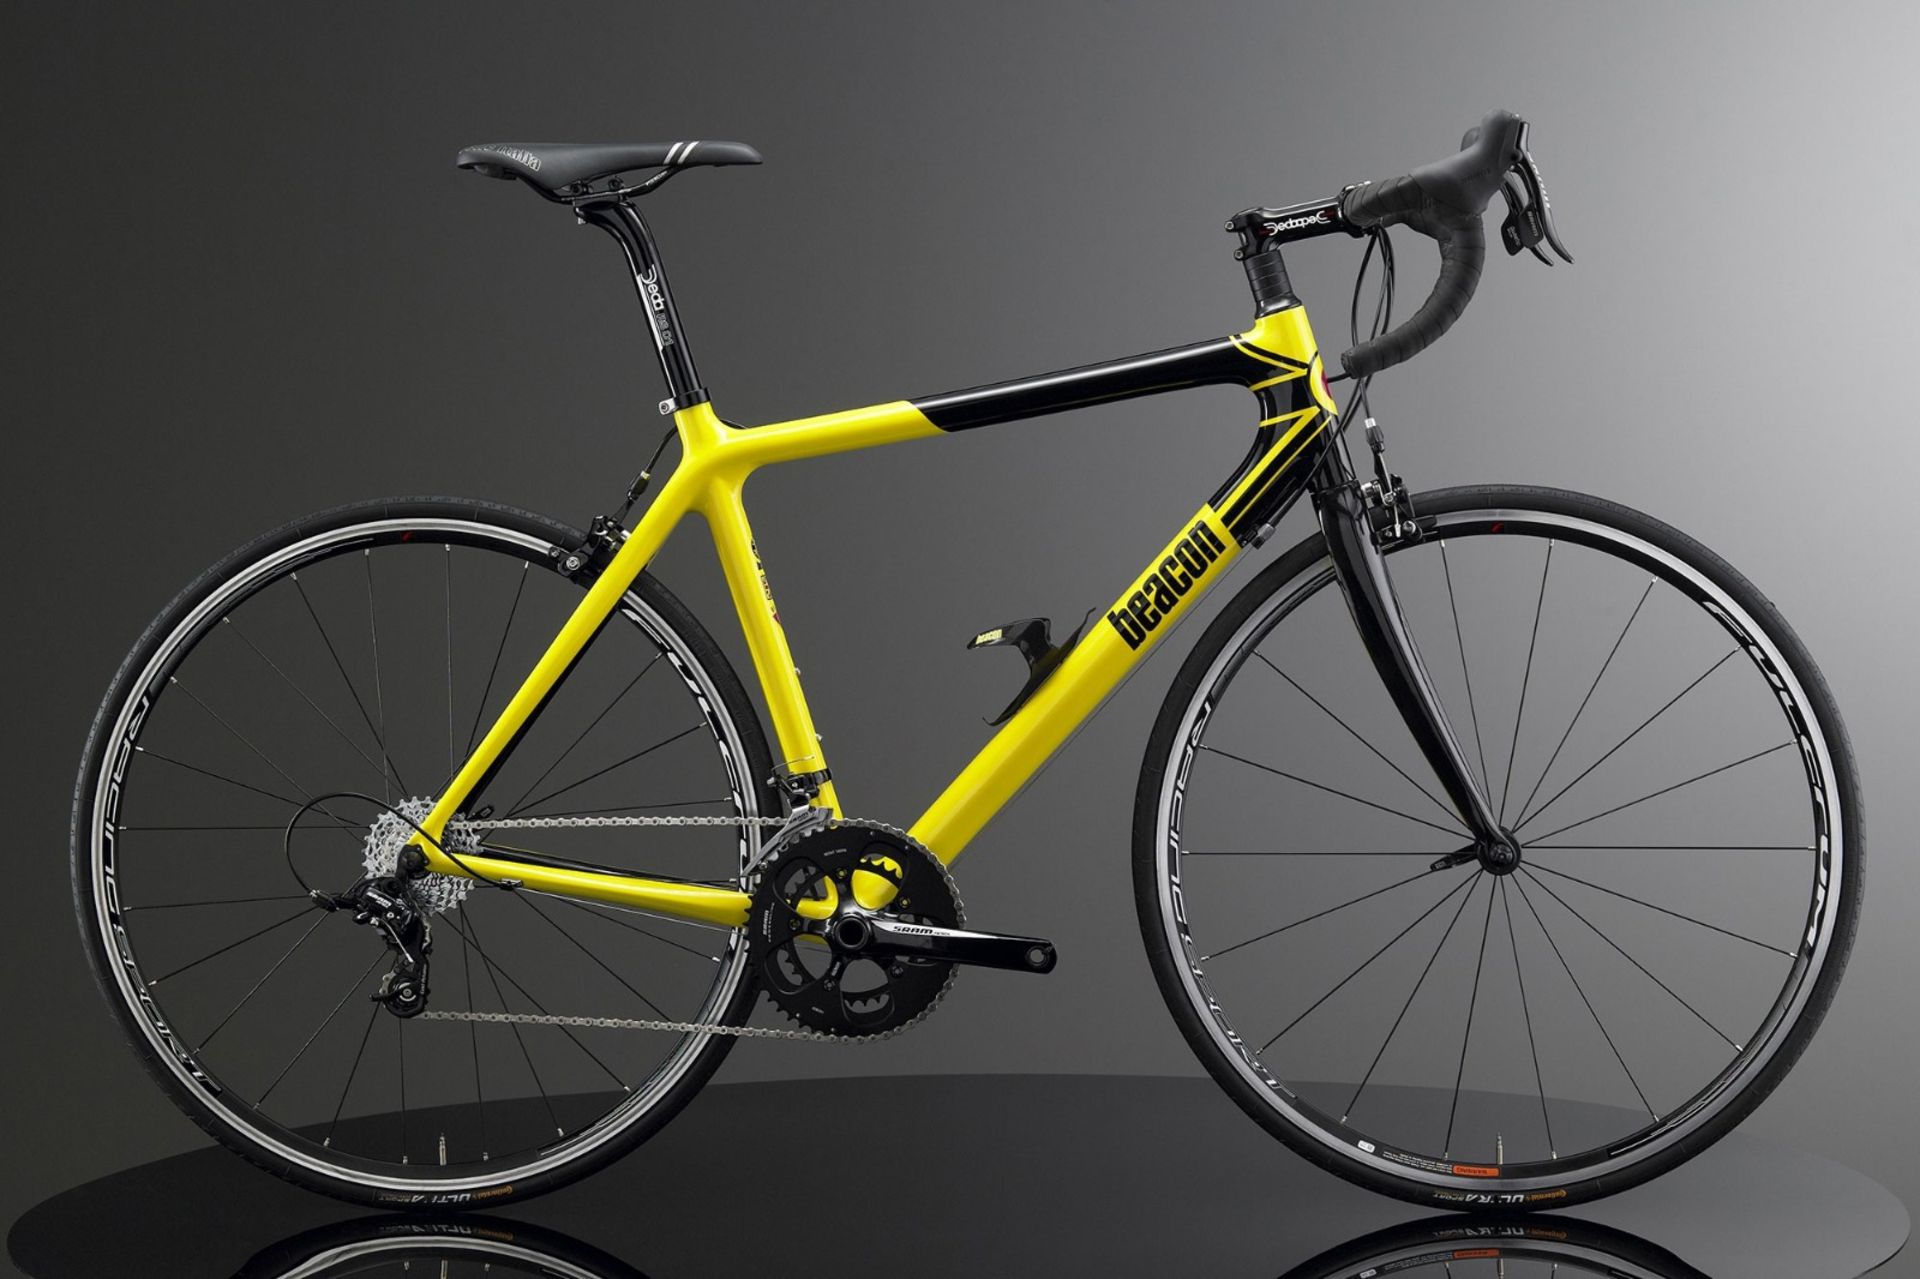 1 x Beacon Model BF-60, Size 480, Carbon Fibre Bike Frame in Yellow & Black. - Image 2 of 3